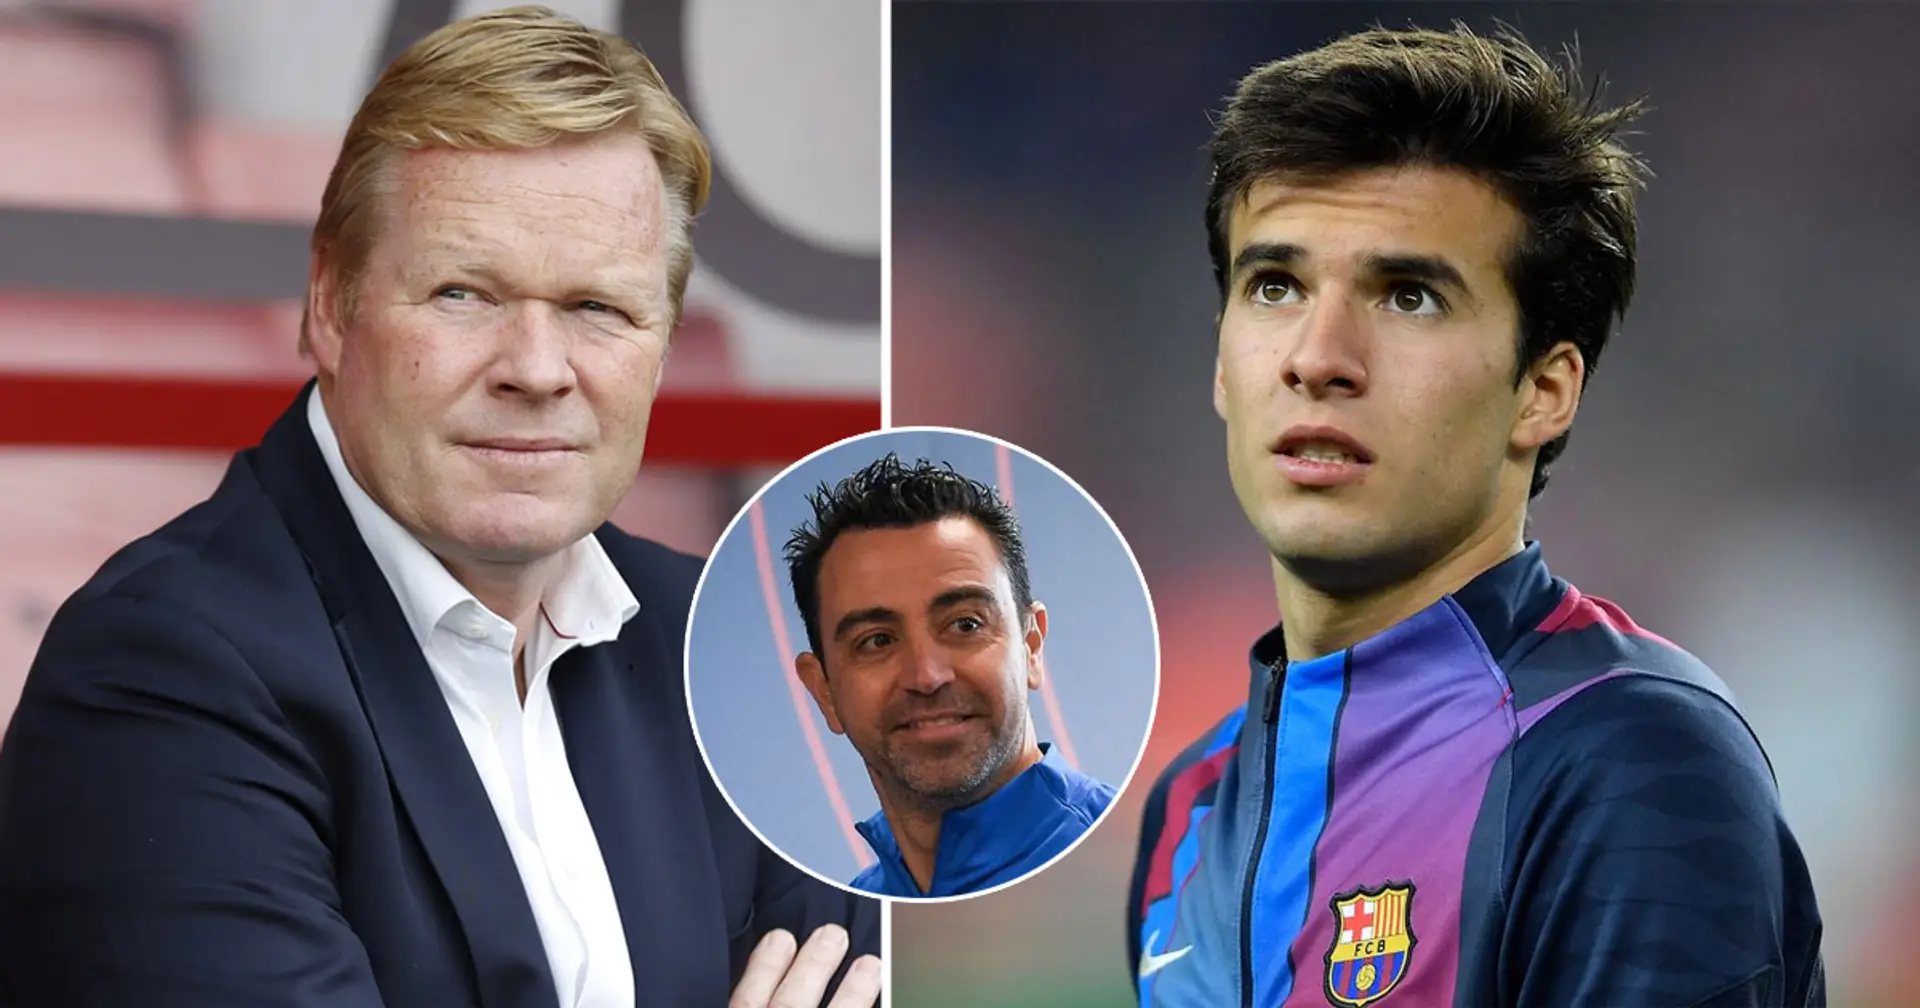 'It's too late for him': Riqui Puig fan argues Barca need to sell midfielder